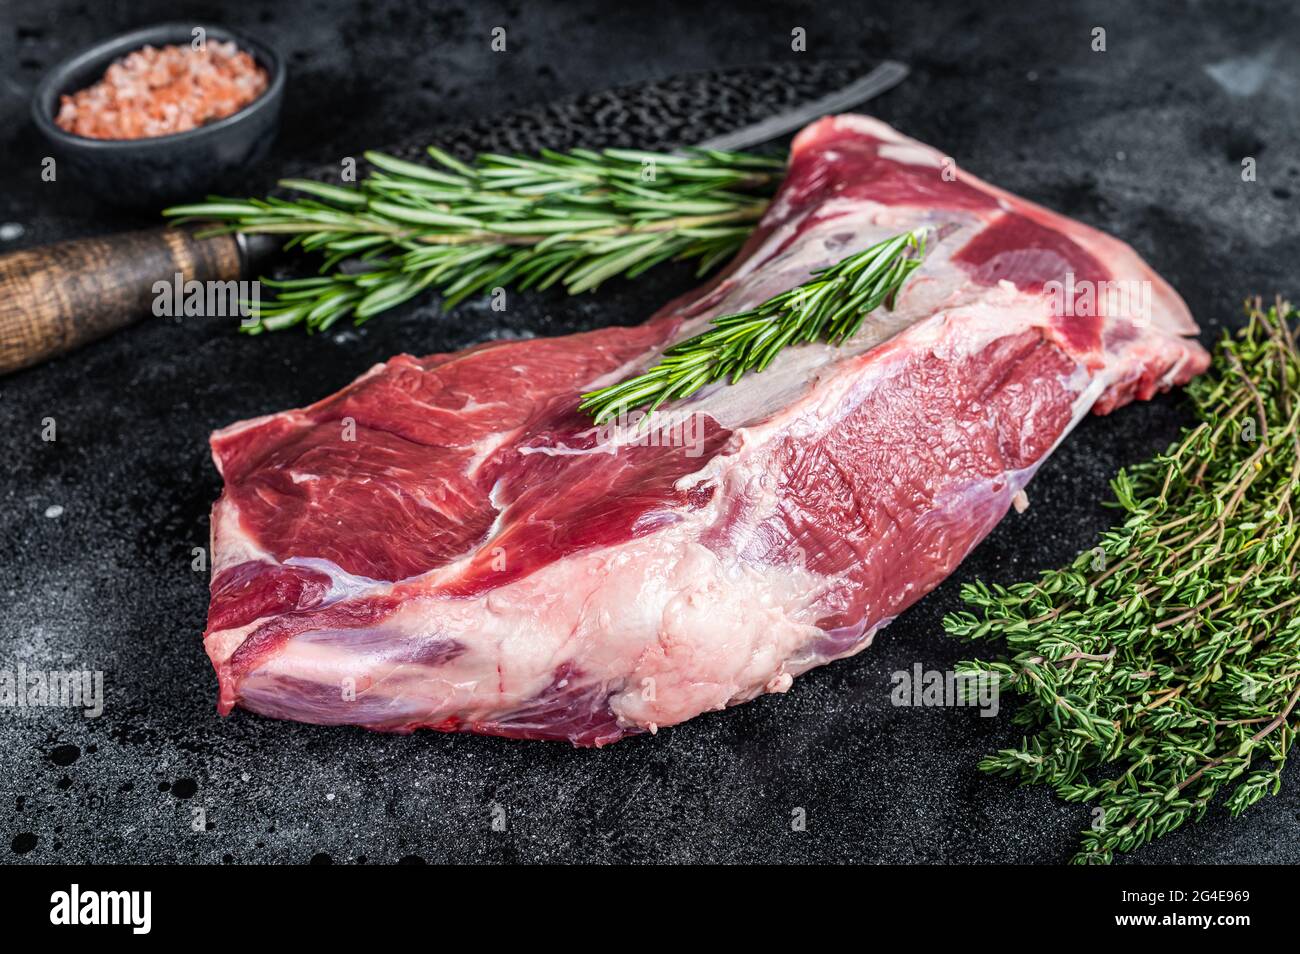 Fresh Raw lamb or goat shoulder meat with butcher knife. Black background. Top view Stock Photo